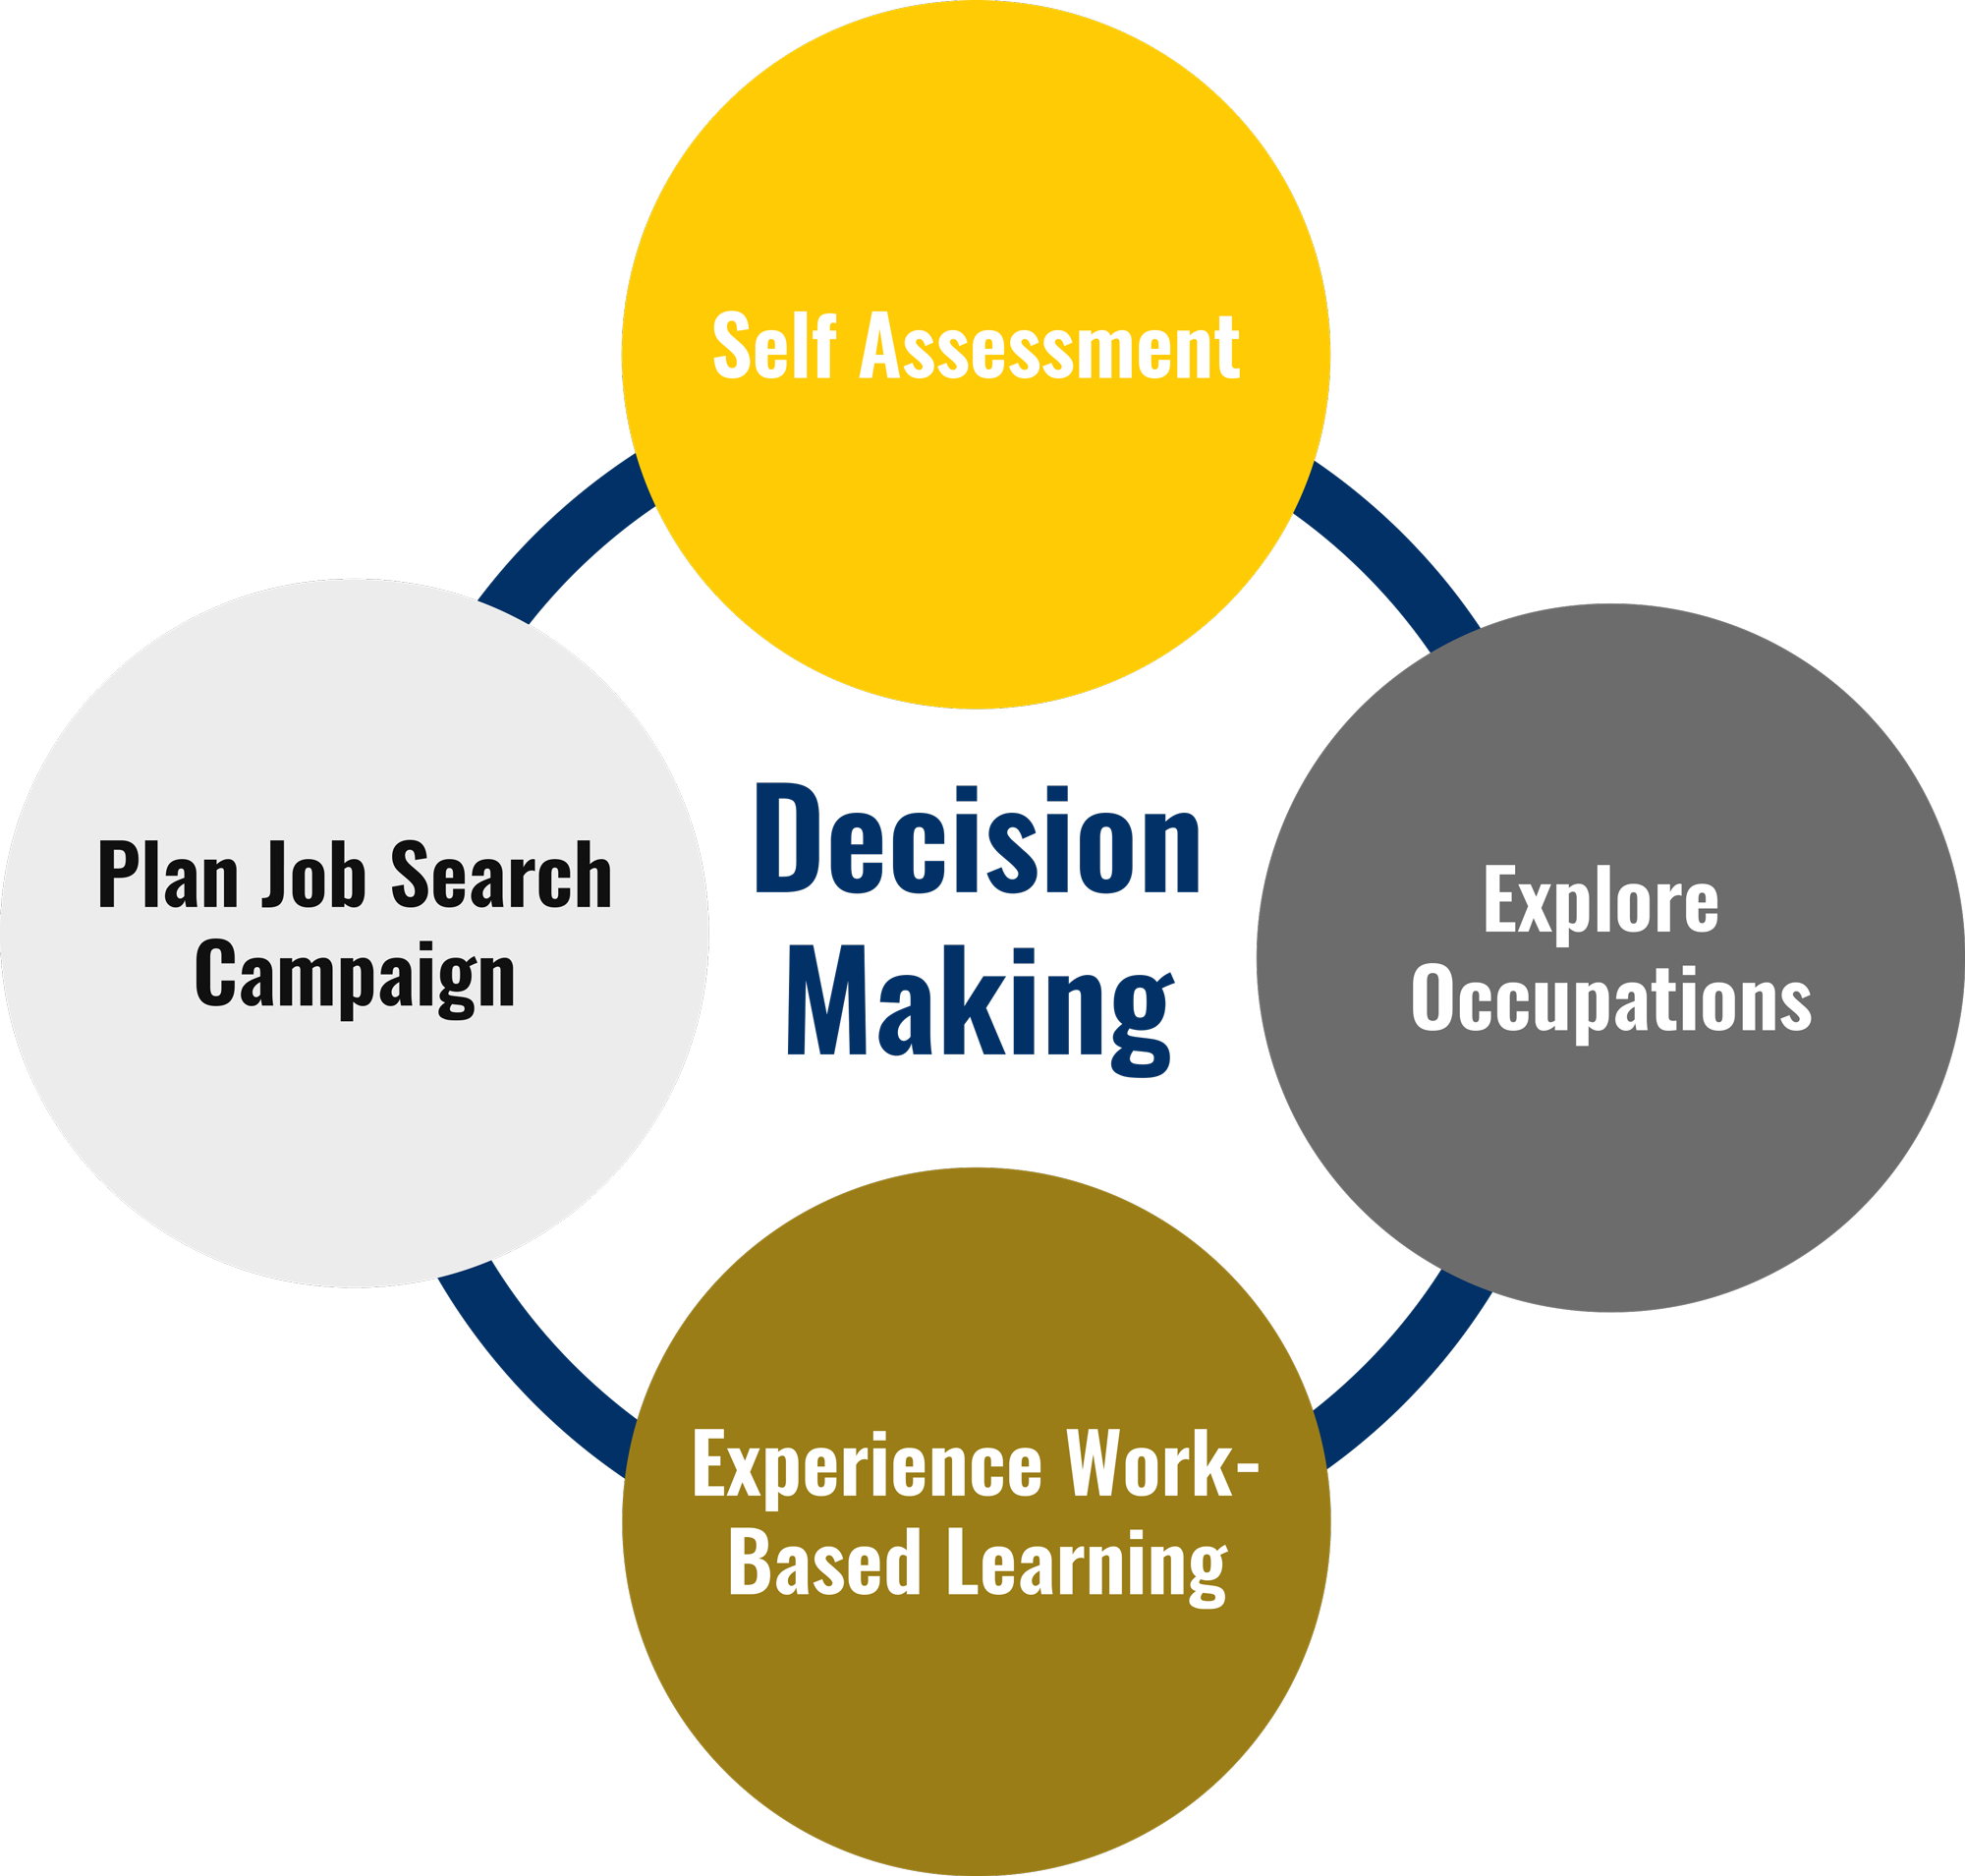 Career Planning Life Cycle includes Self Assessment, Explore Occupations, Experience Work-Based Learning and Plan Job Search.